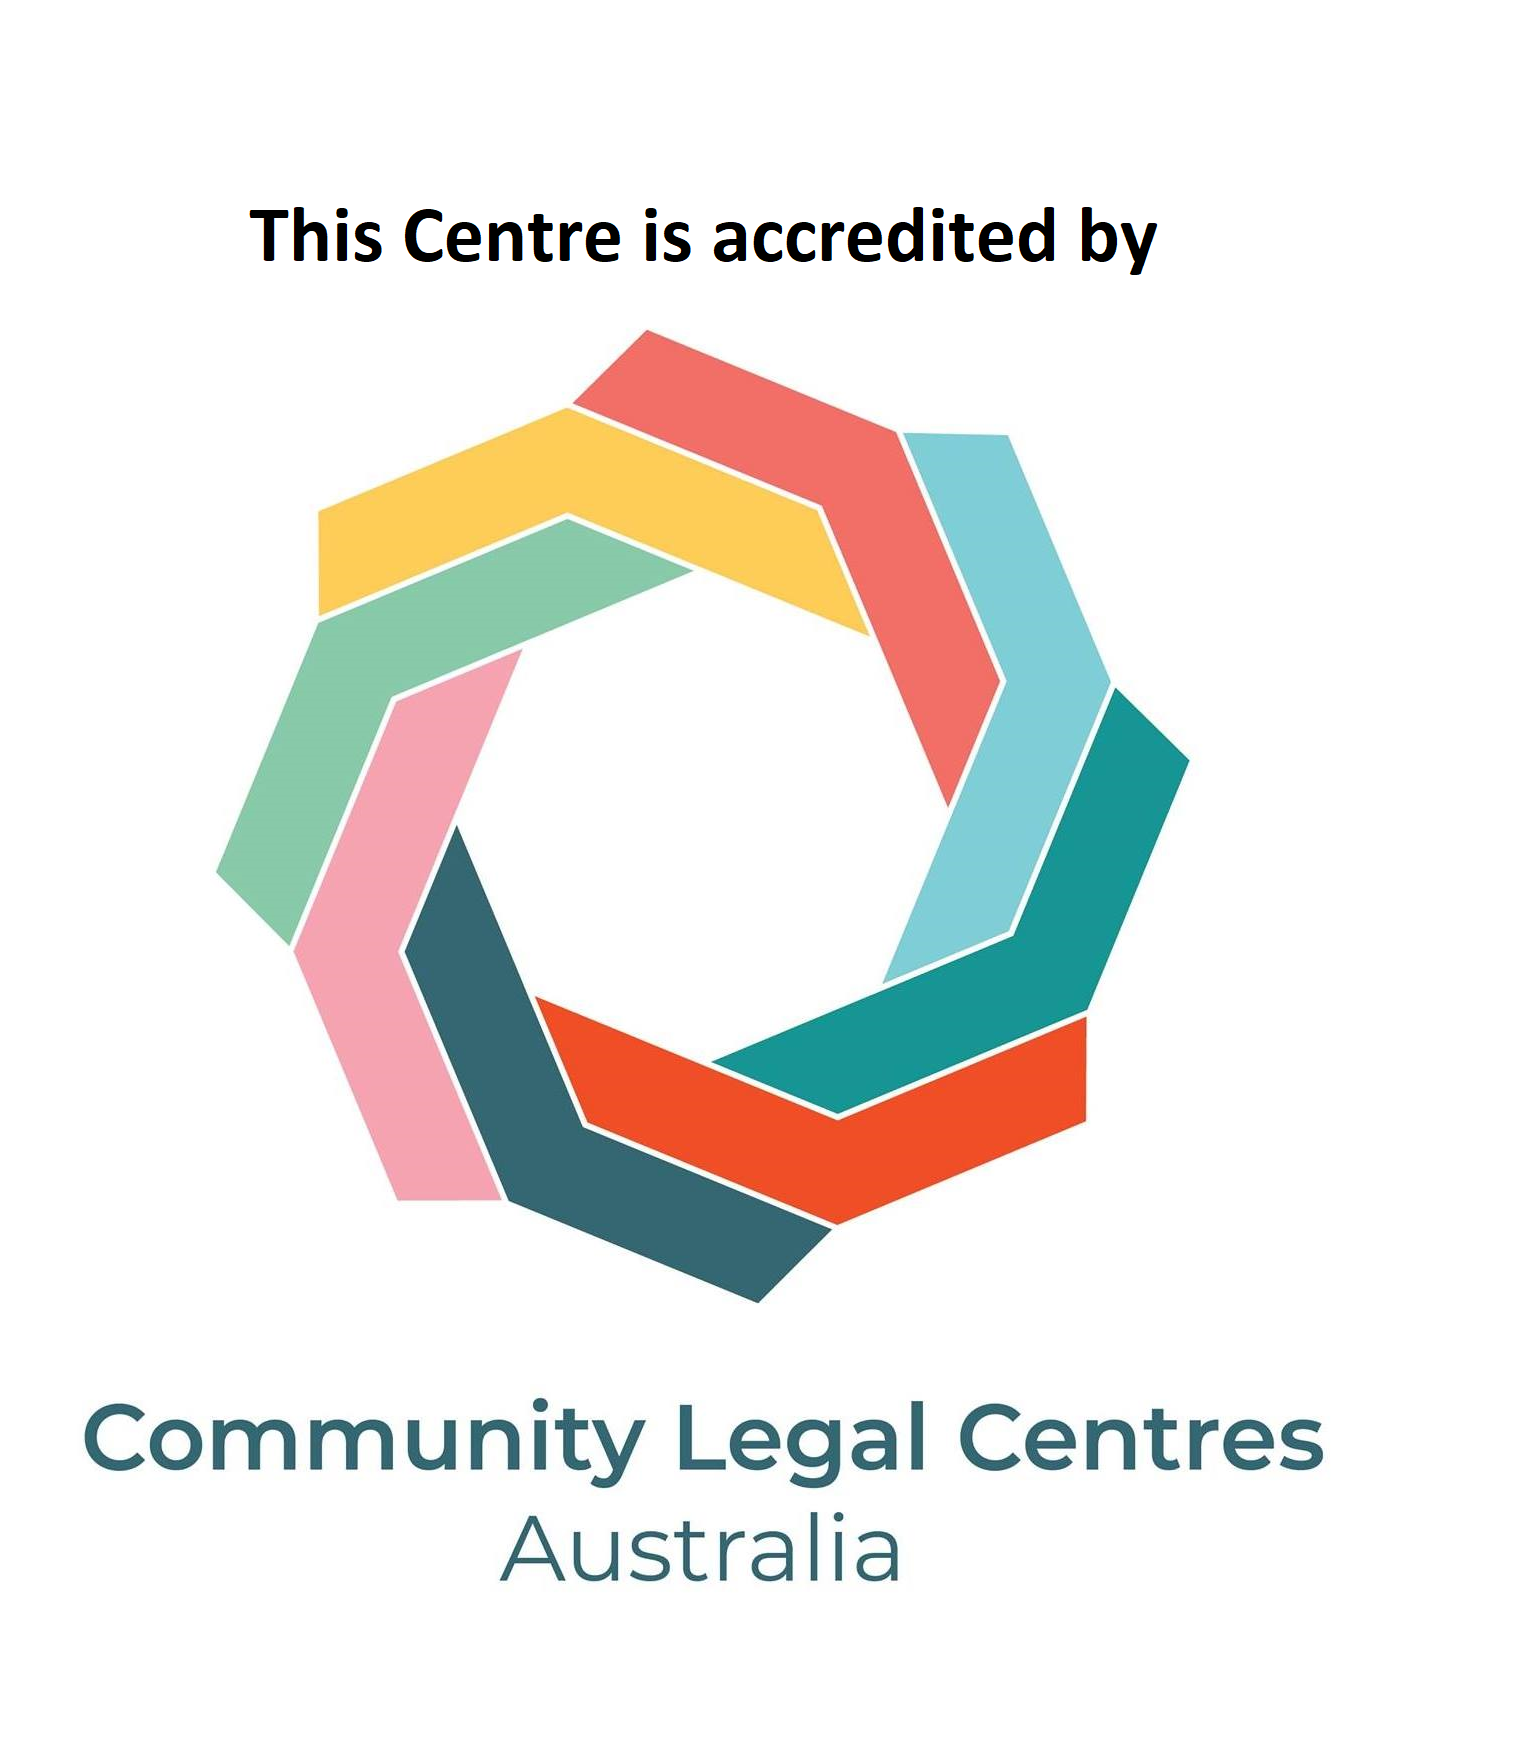 This Centre is accredited by NACLC